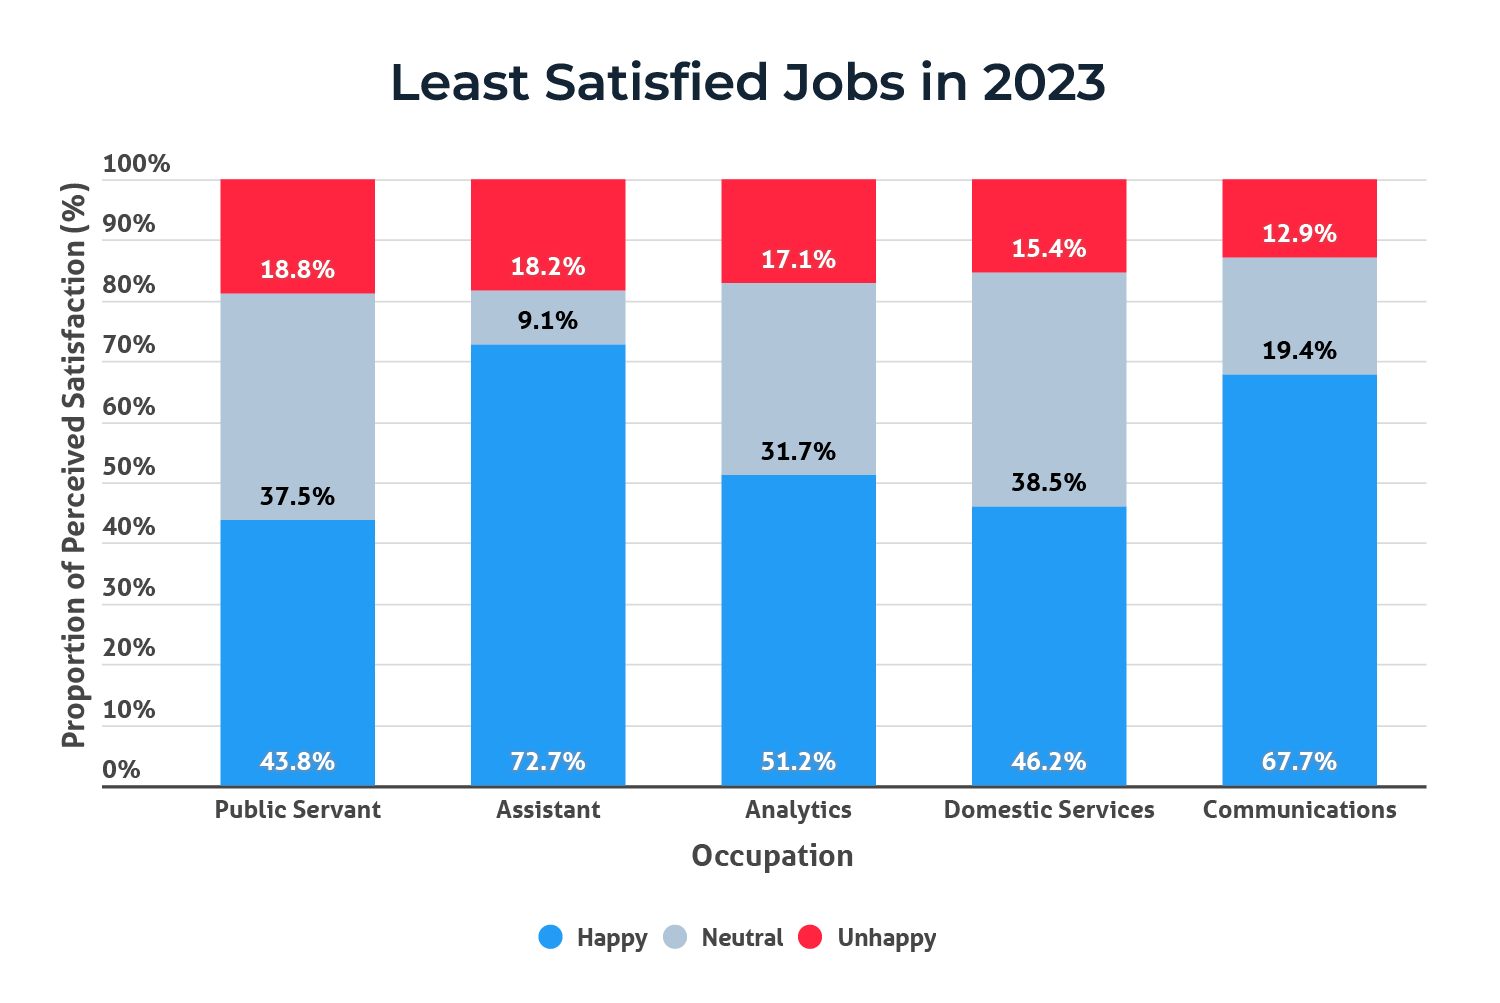 Vertical bar graph showing least satisfied jobs and proportion of respondents